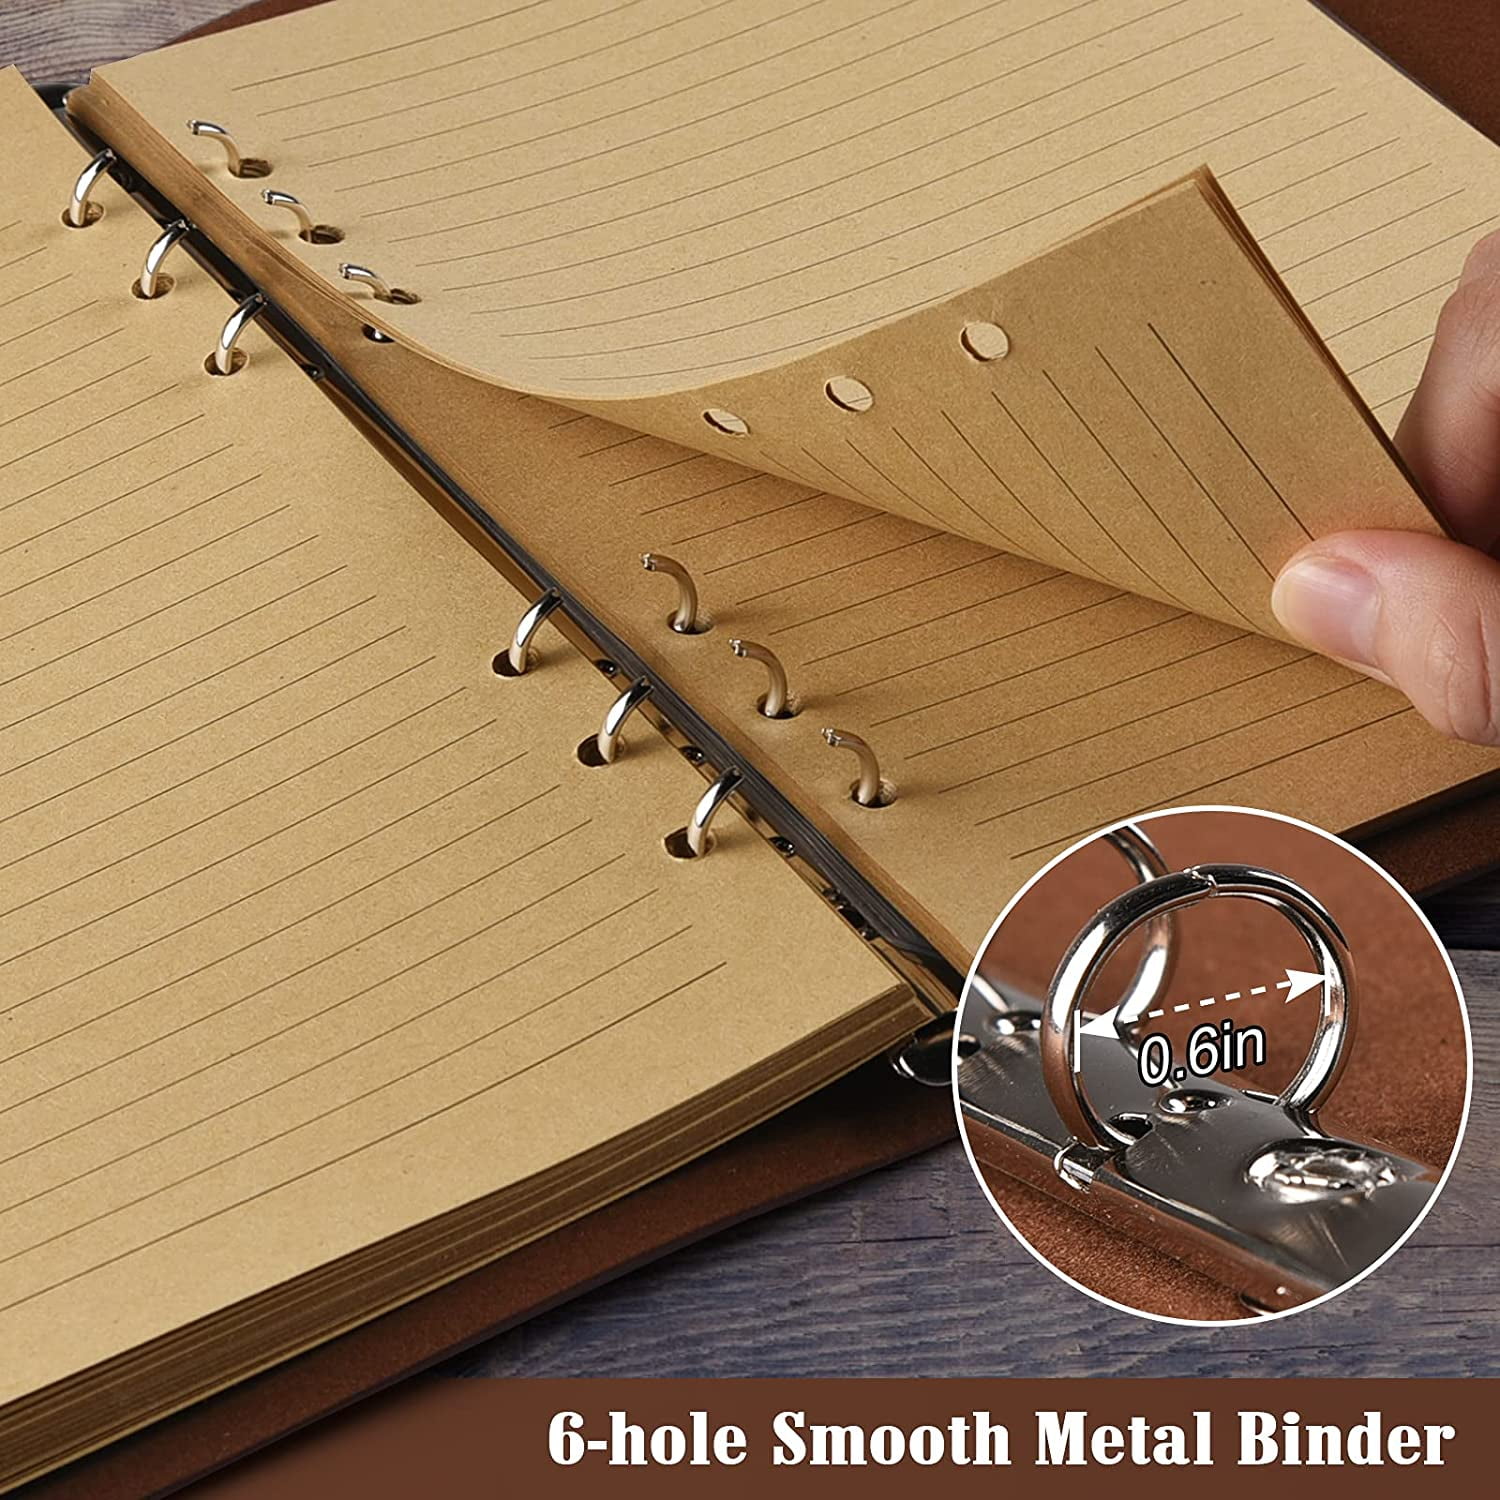 Gorgeous Plywood A5 Notebook / Journal with LINED paper